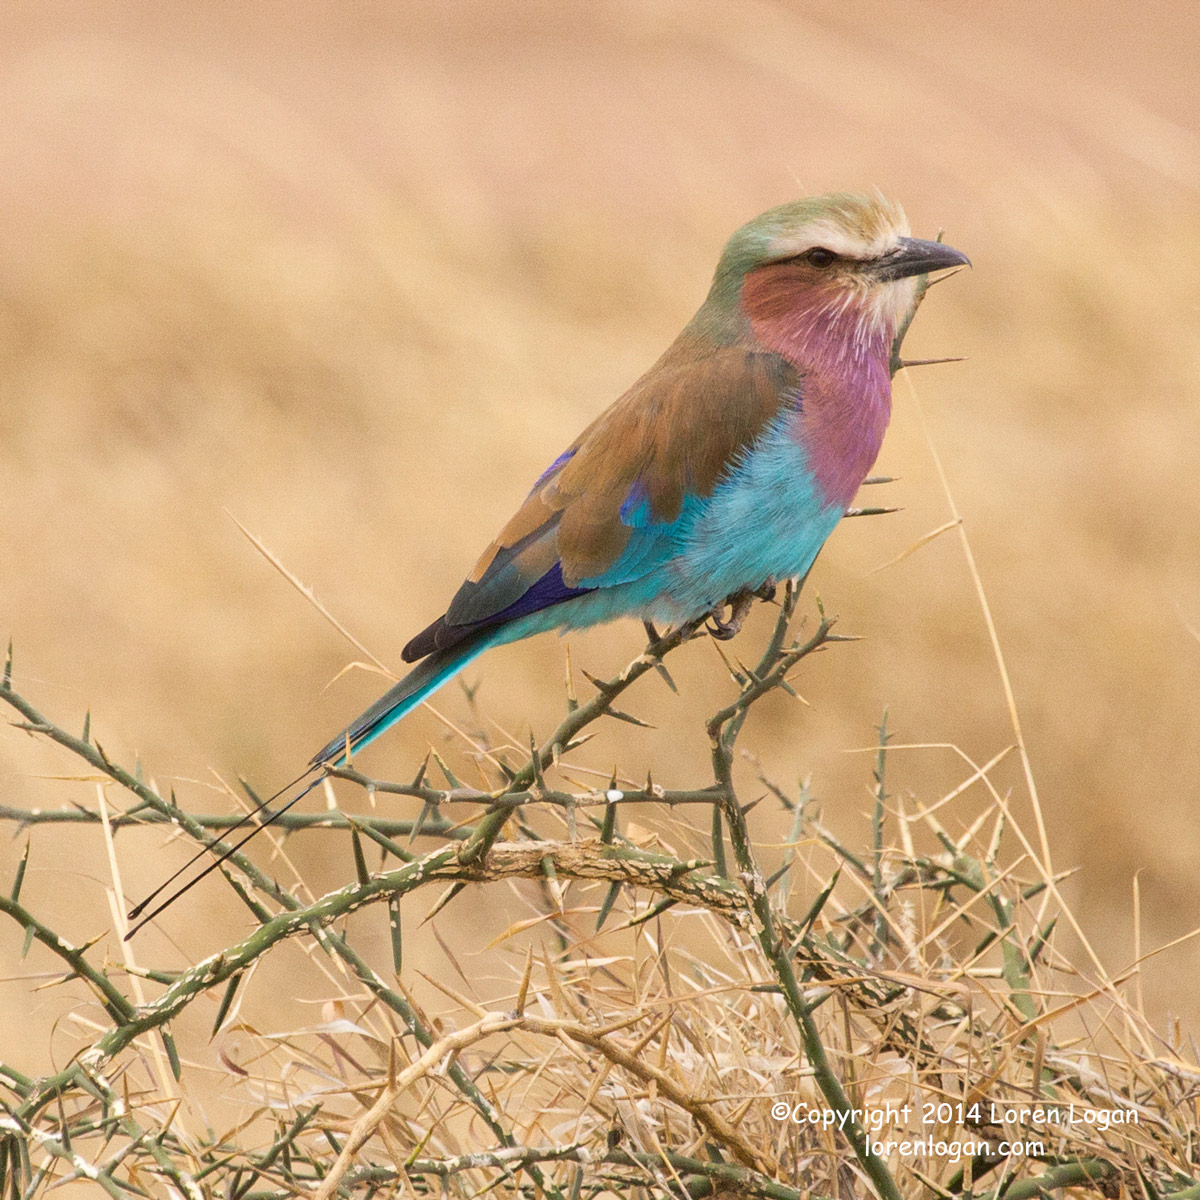 Lilac-breasted roller perched on a thorny branch.